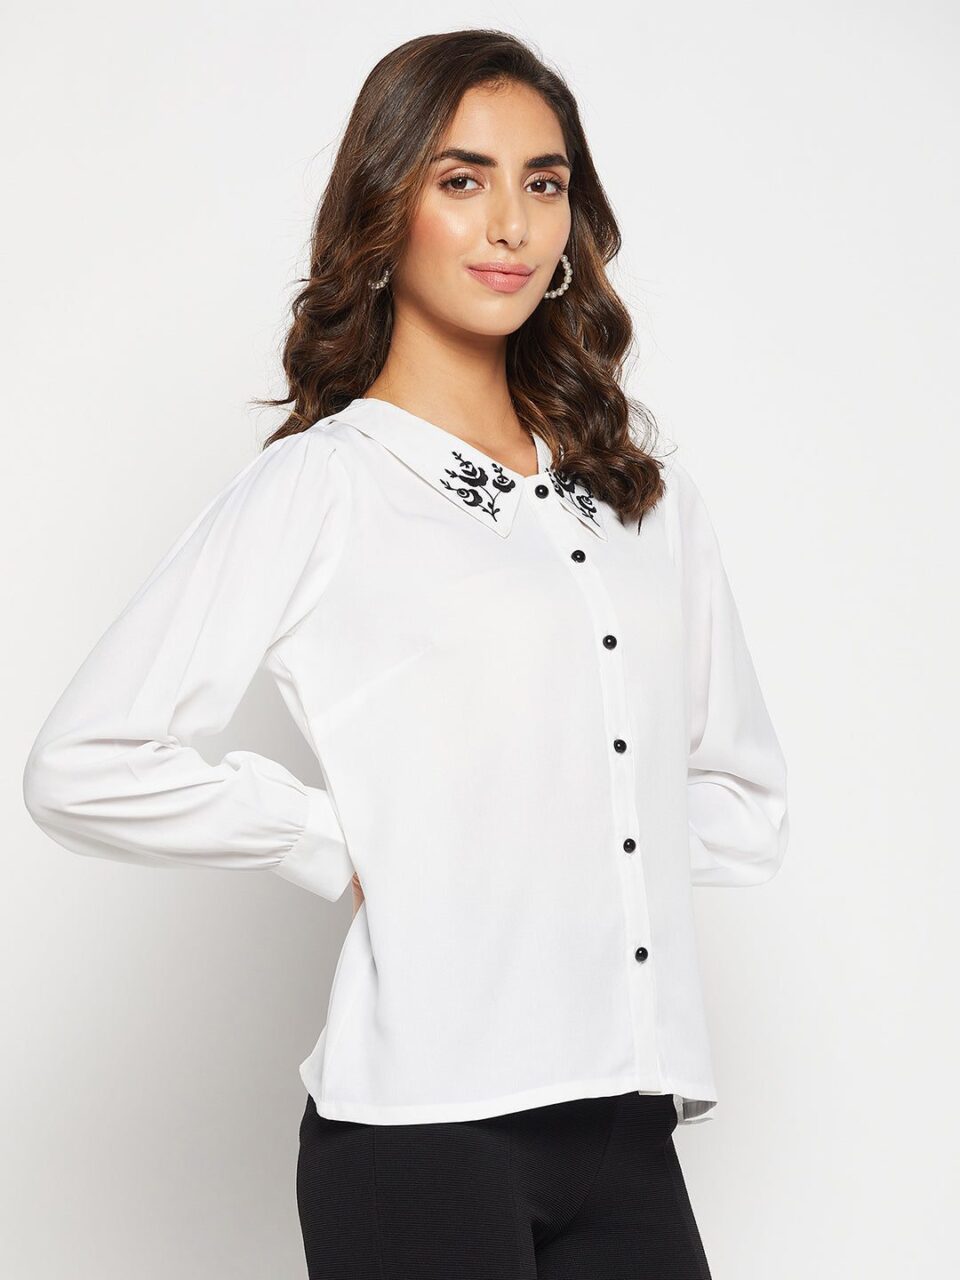 Women's White Contrast Collar Embroidered Shirt